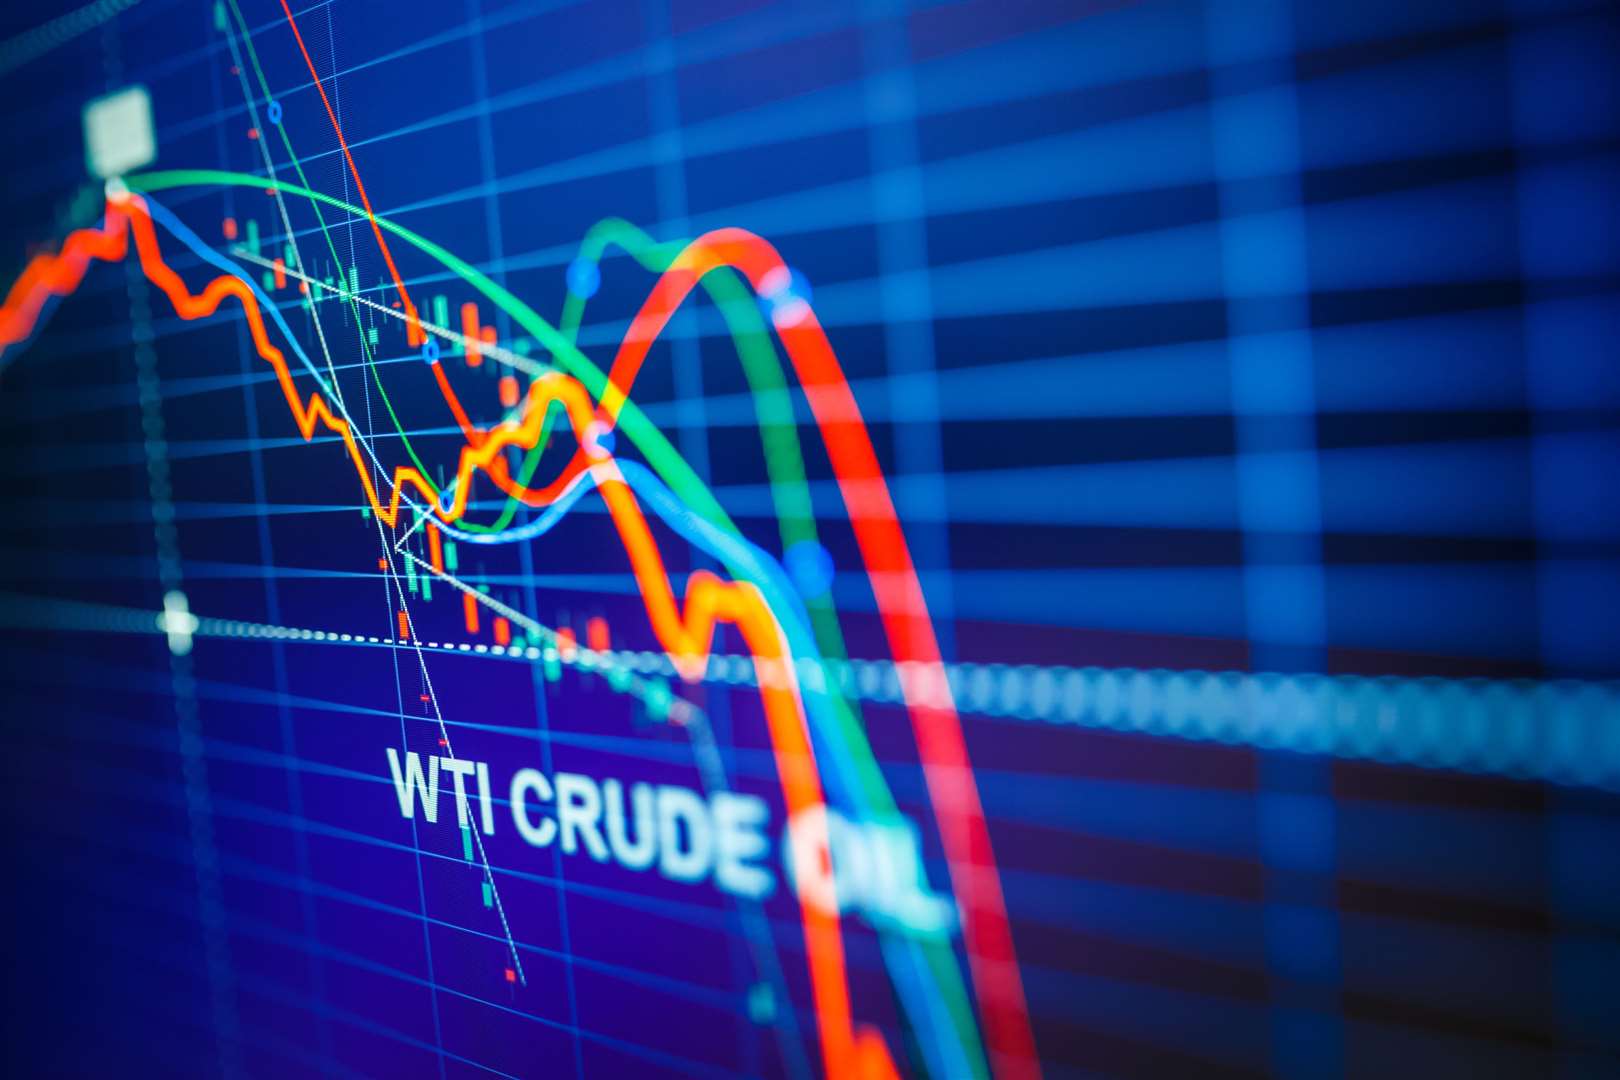 The price of West Texas International crude oil plummeted to almost minus $40 in April.